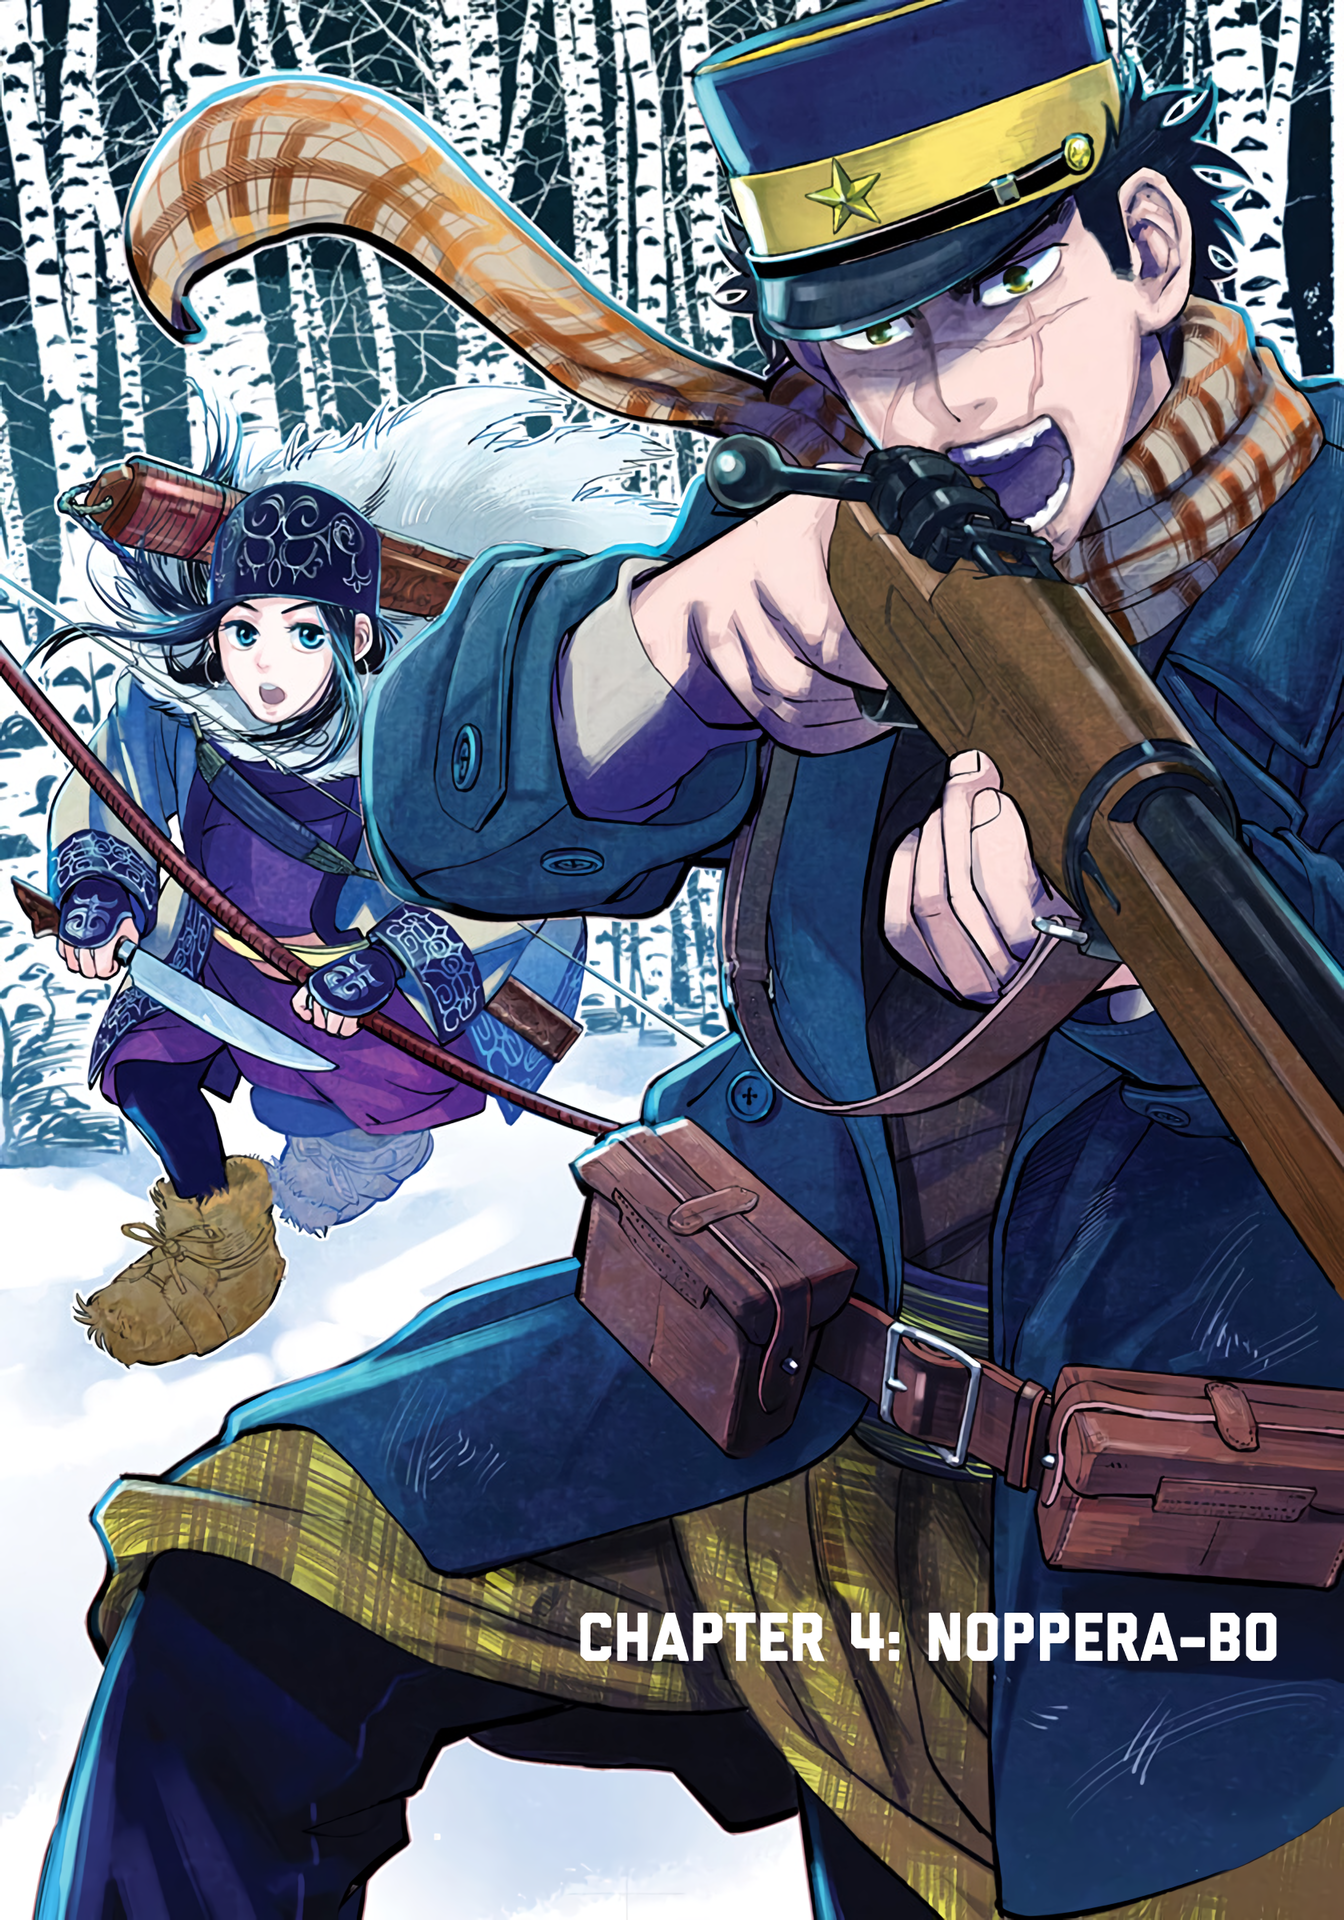 Golden Kamuy - Digital Colored Comics Vol.1 Chapter 4: Noppera-Bou - Picture 1